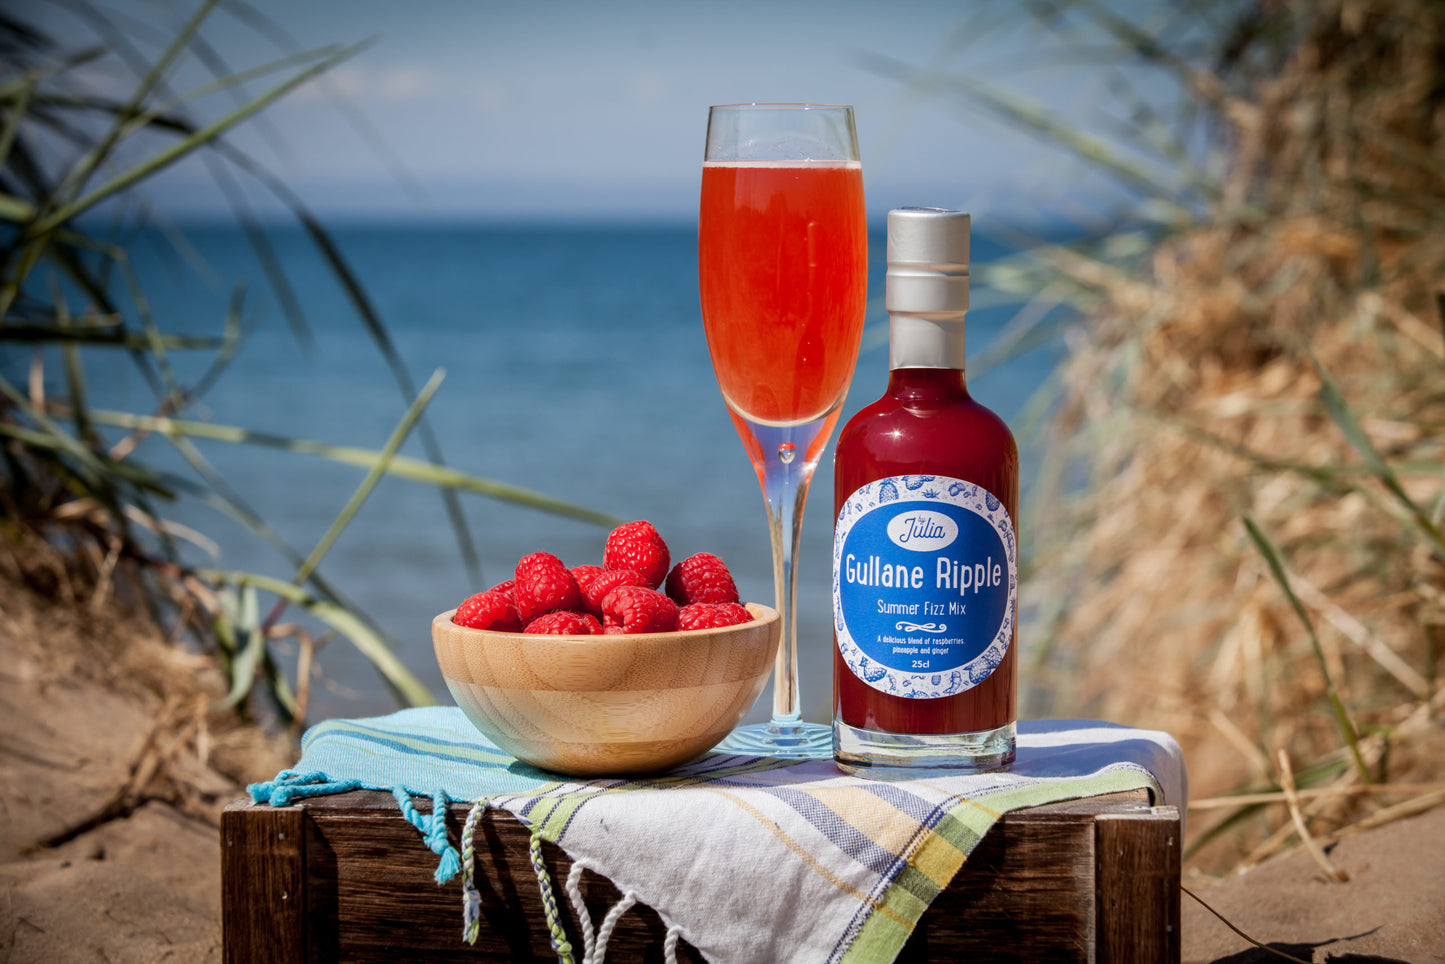 Large Bottle of Gullane Ripple Summer Fizz Mix and glass of cocktail on wooden crate with beach in background and bowl of raspberries